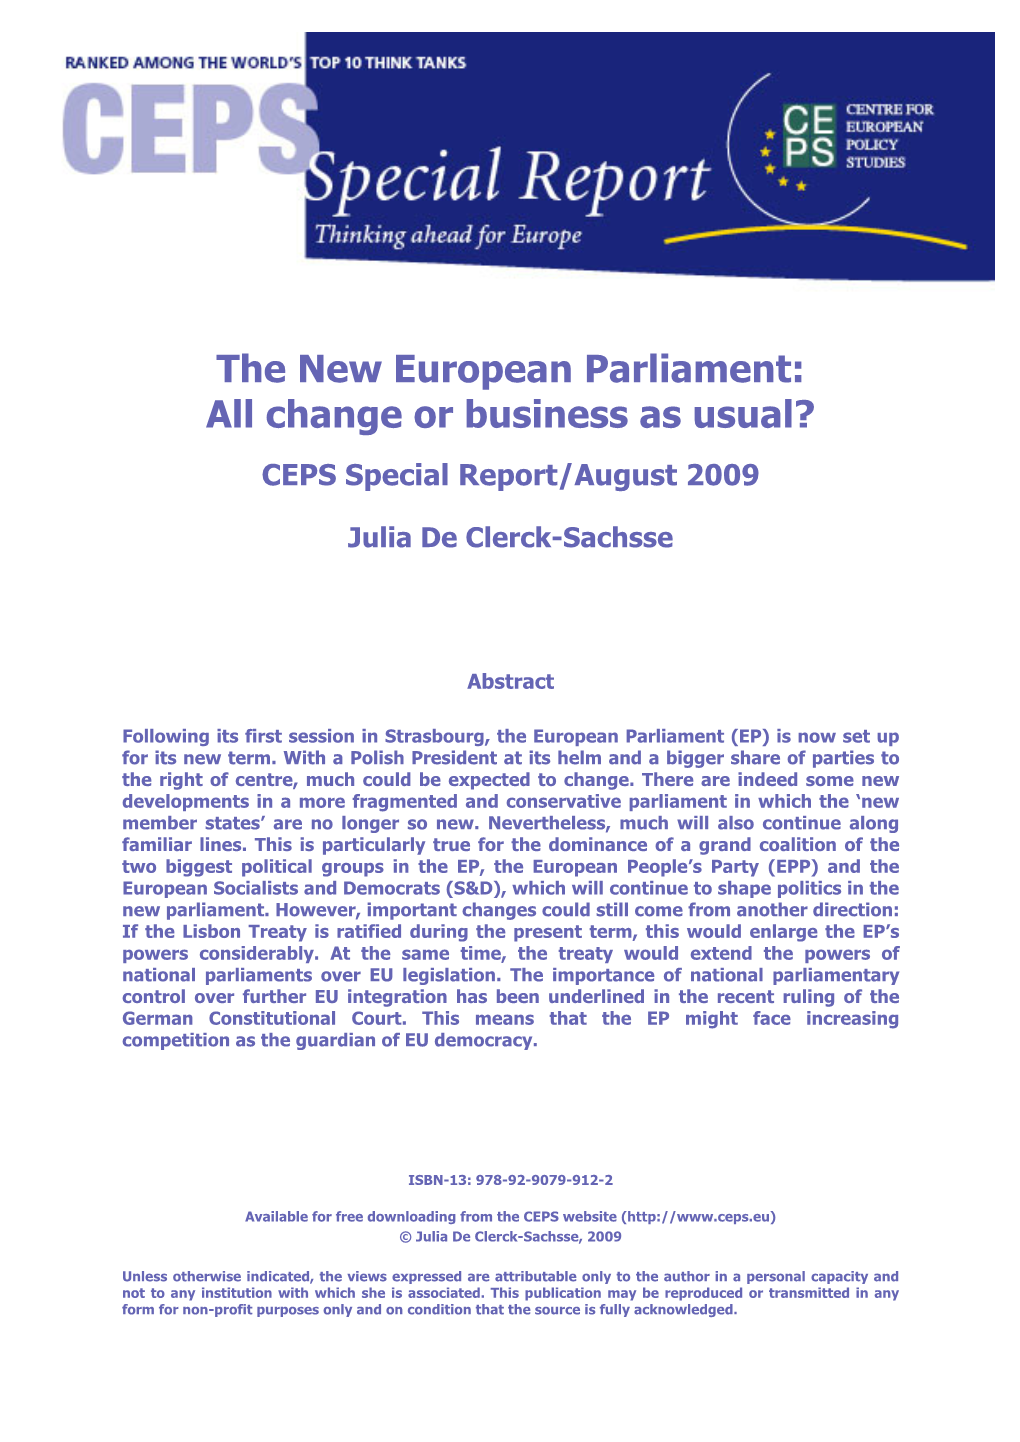 The New European Parliament: All Change Or Business As Usual? CEPS Special Report/August 2009